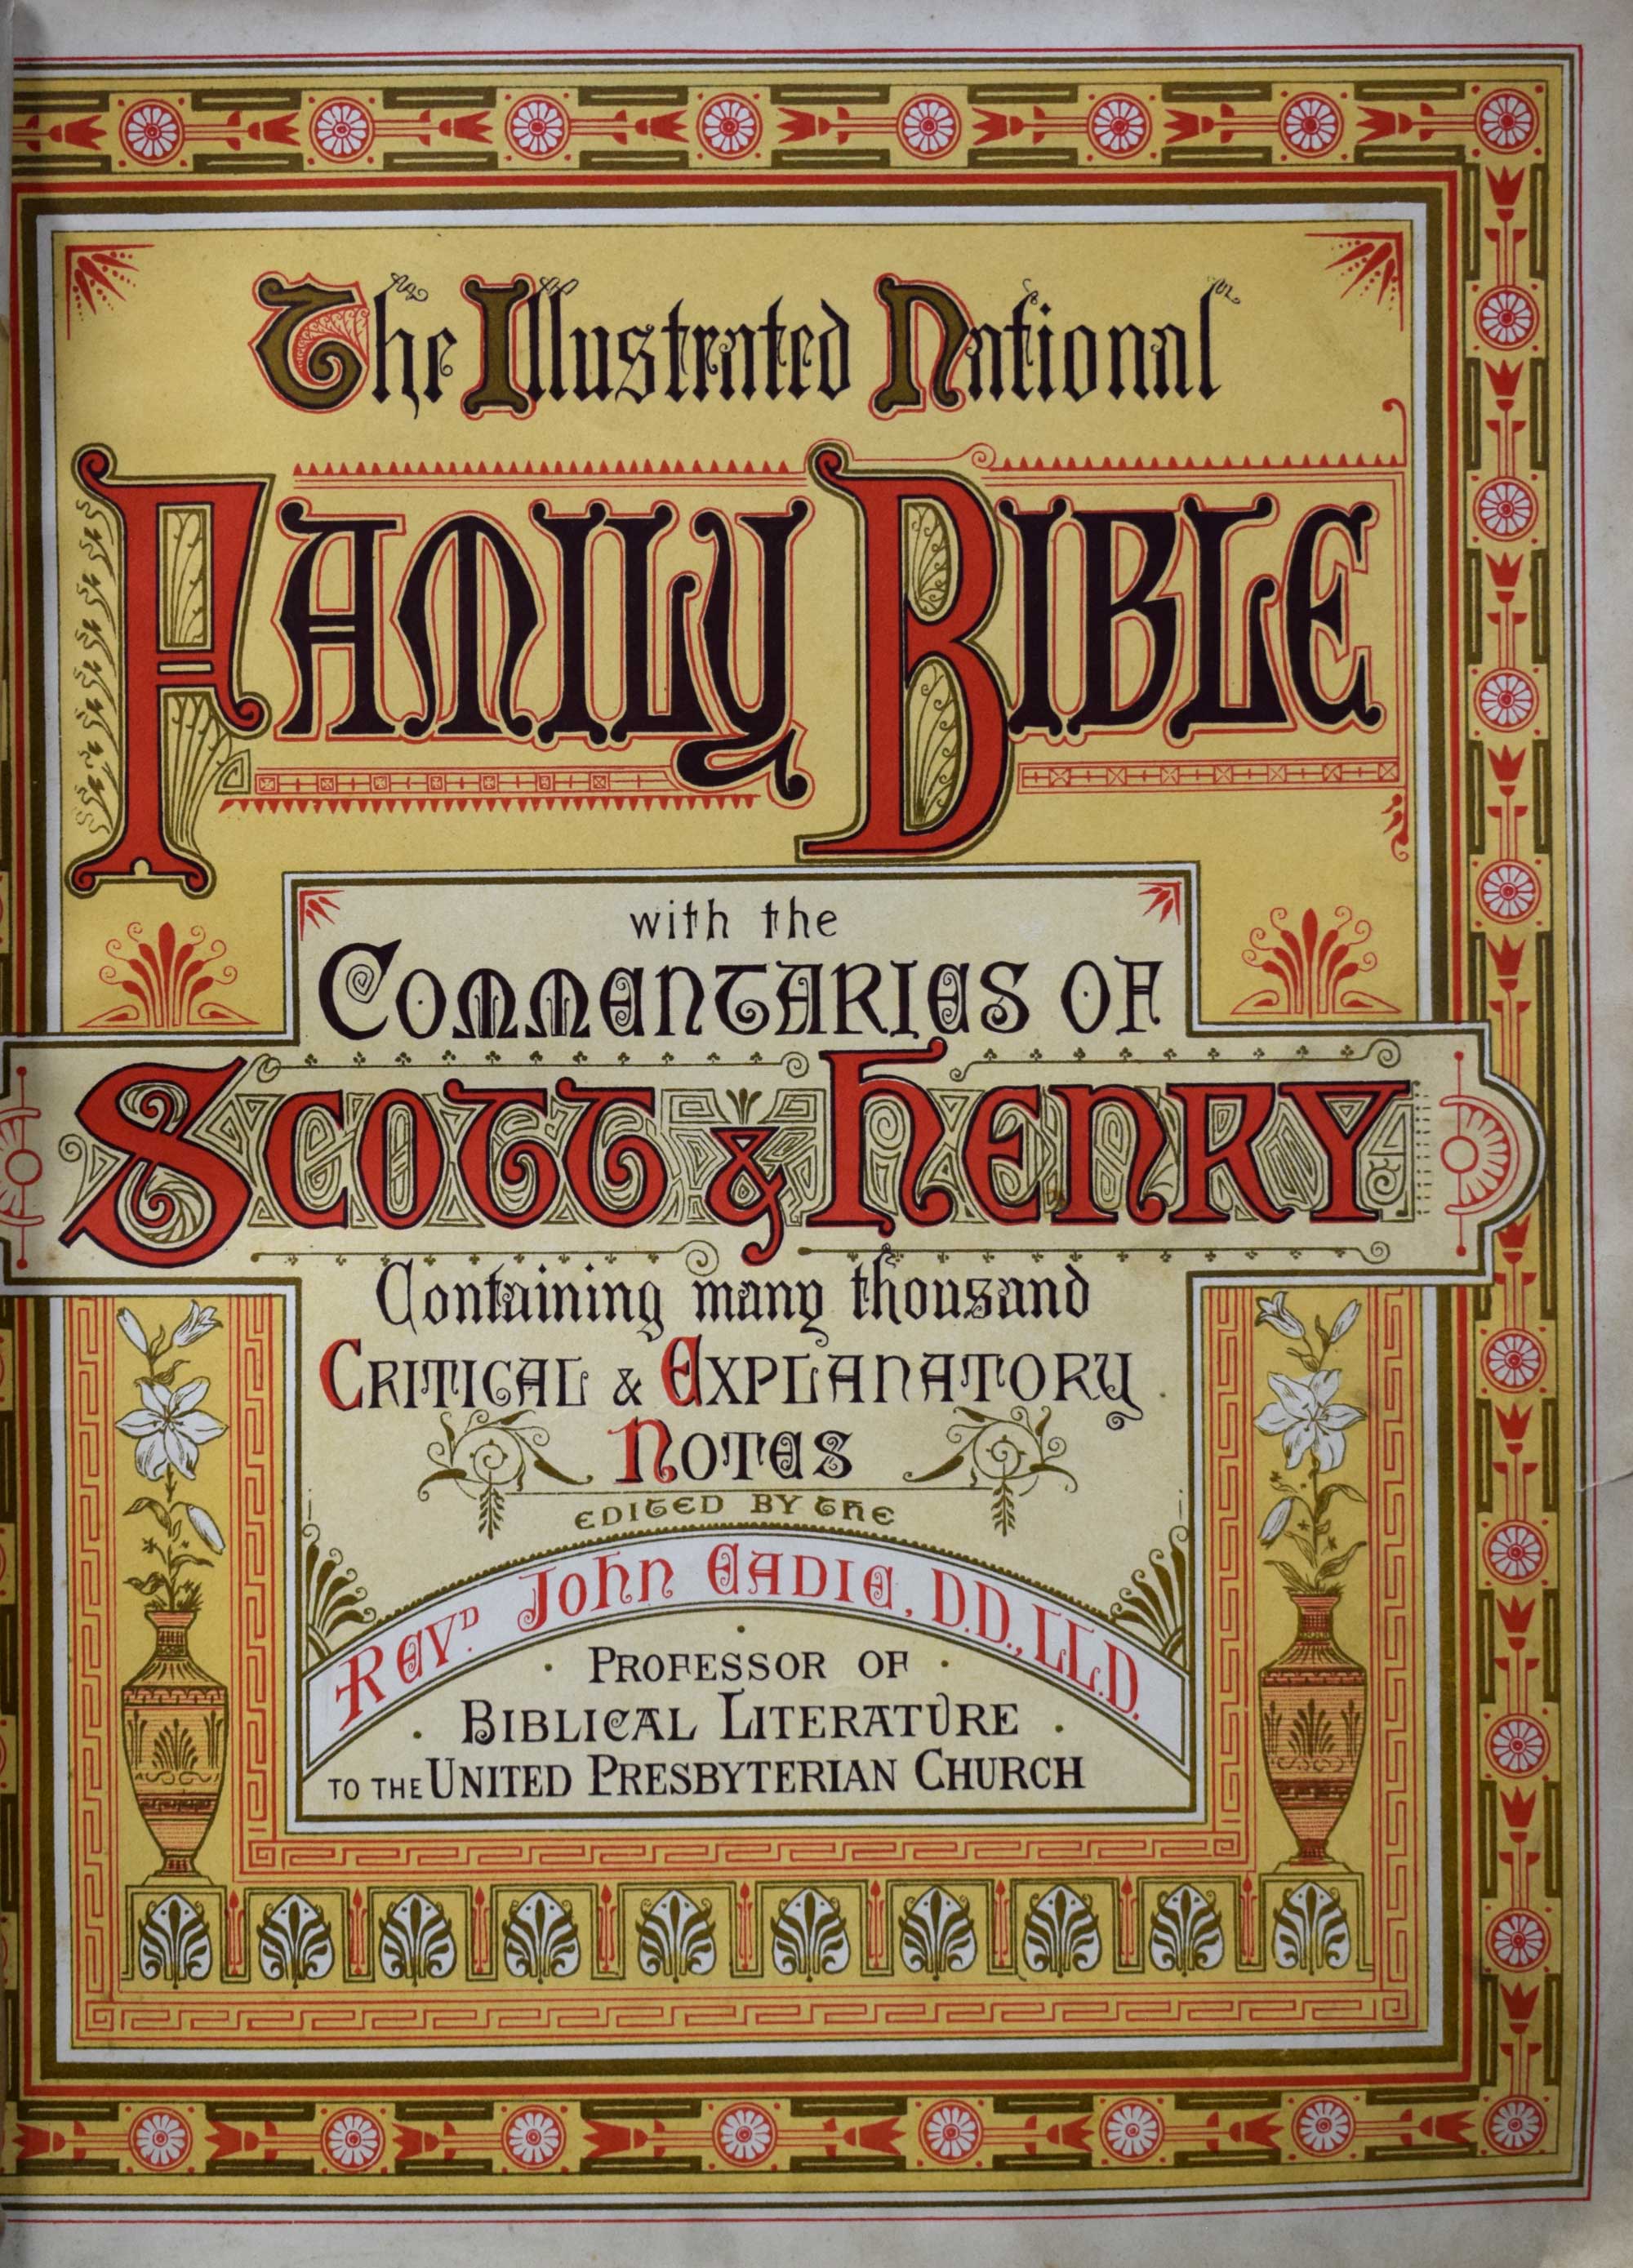 The National Comprehensive Family Bible with the Commentaries of Scott and Henry. Cassell edition.